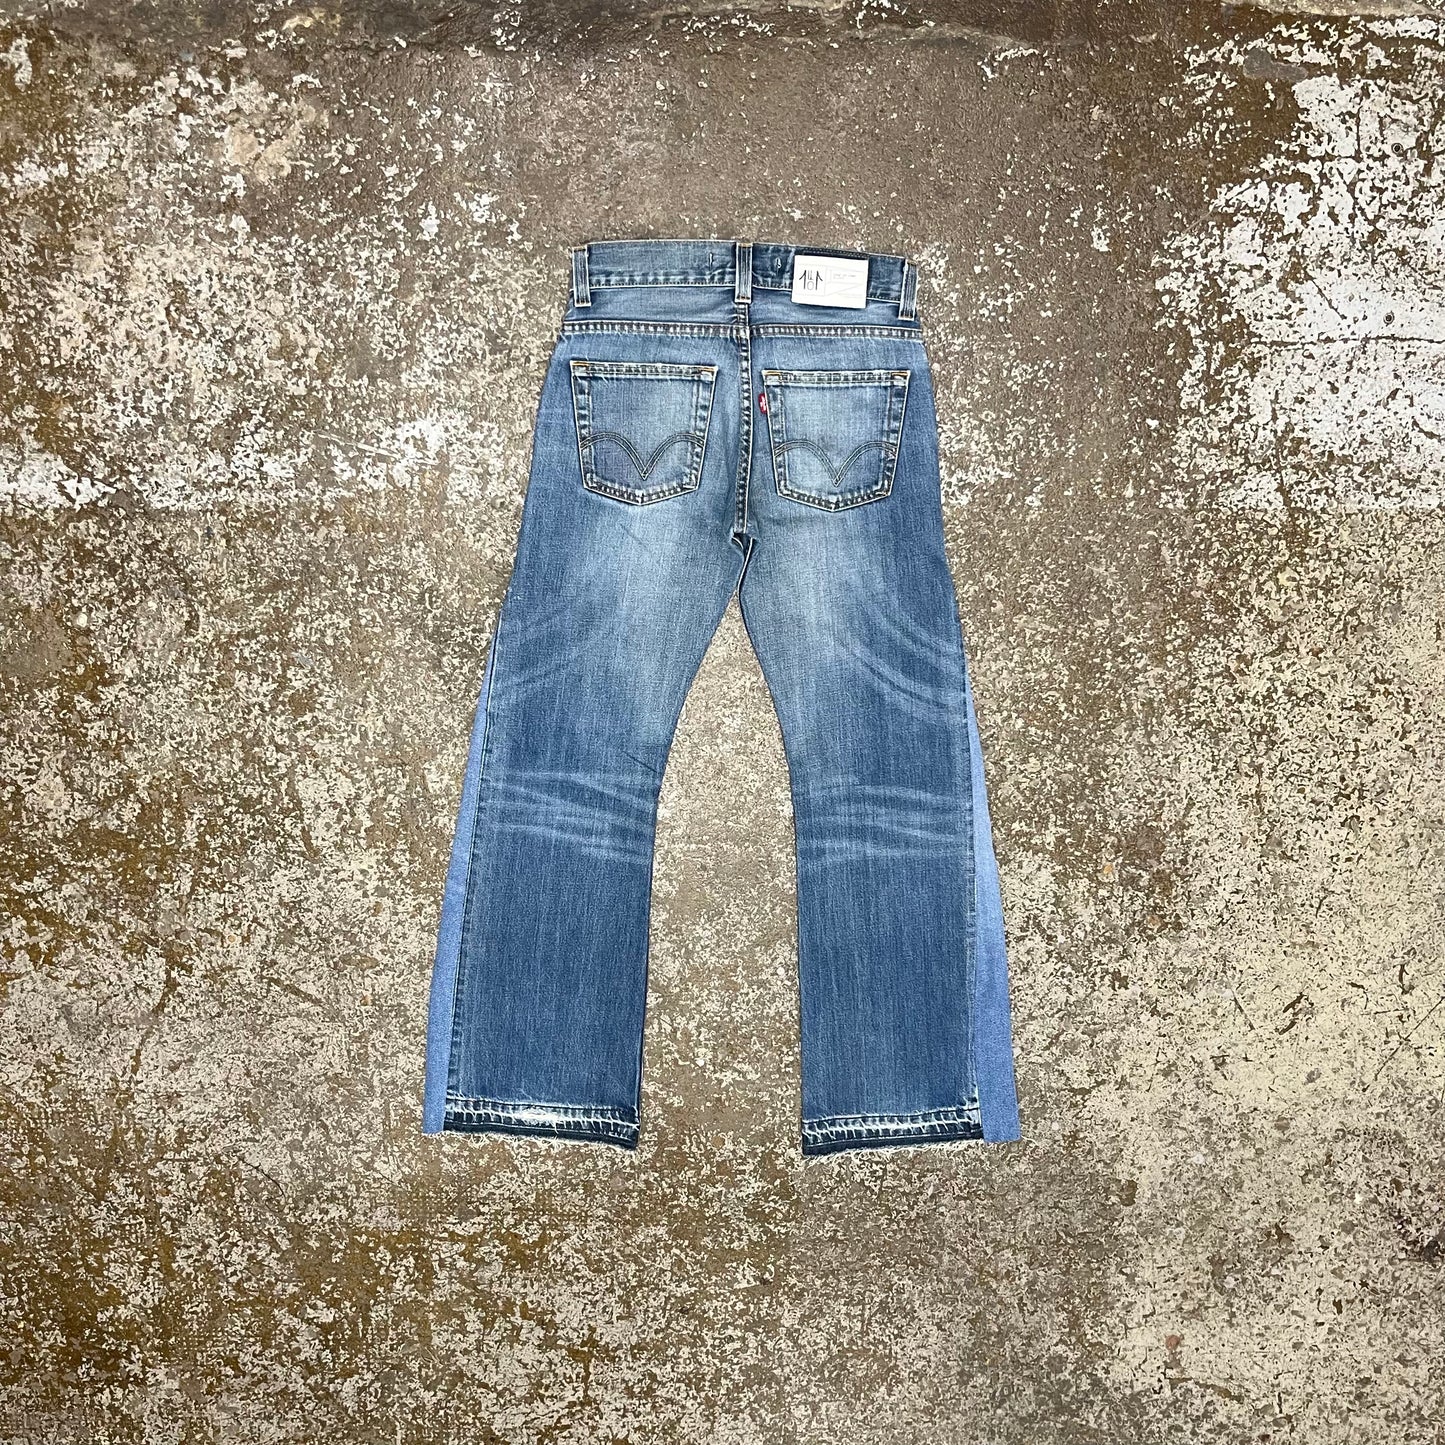 512 LEVI'S WORK V3 "EXAGGERATED" FADED BLUE